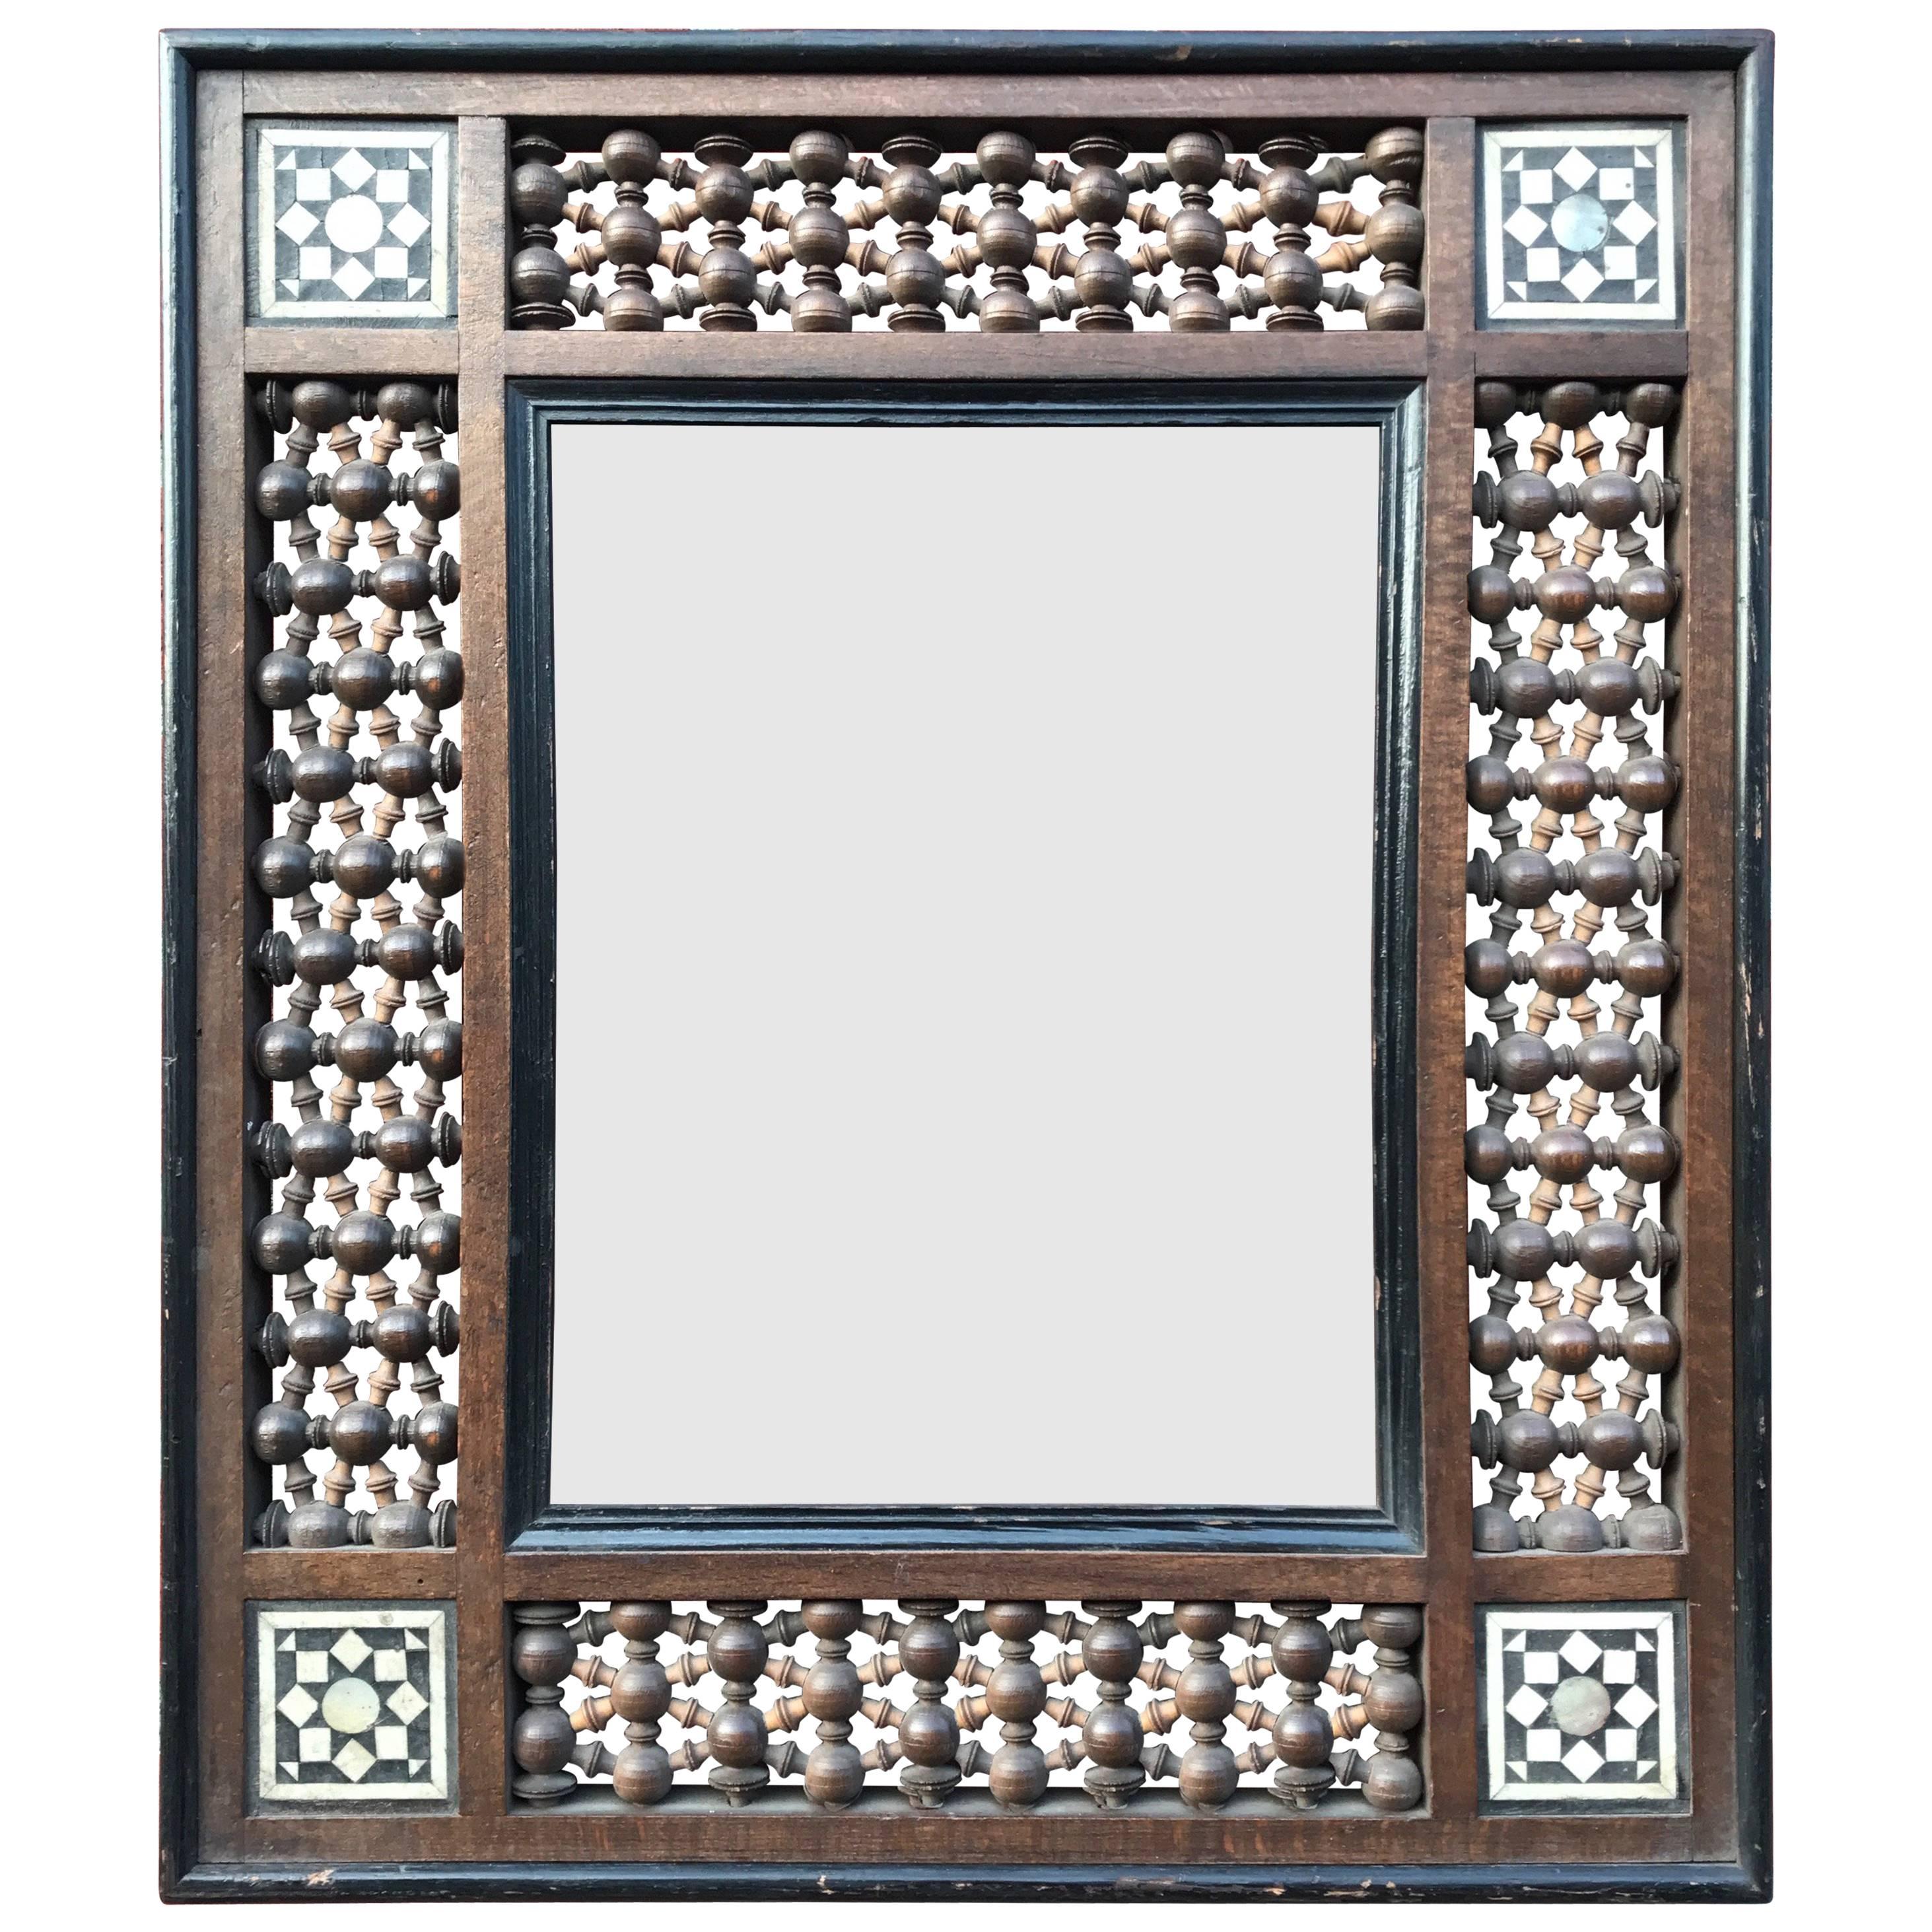 Antique Moorish Picture Frame Inlaid, Arab Motifs in Bone and Mother-of-Pearl